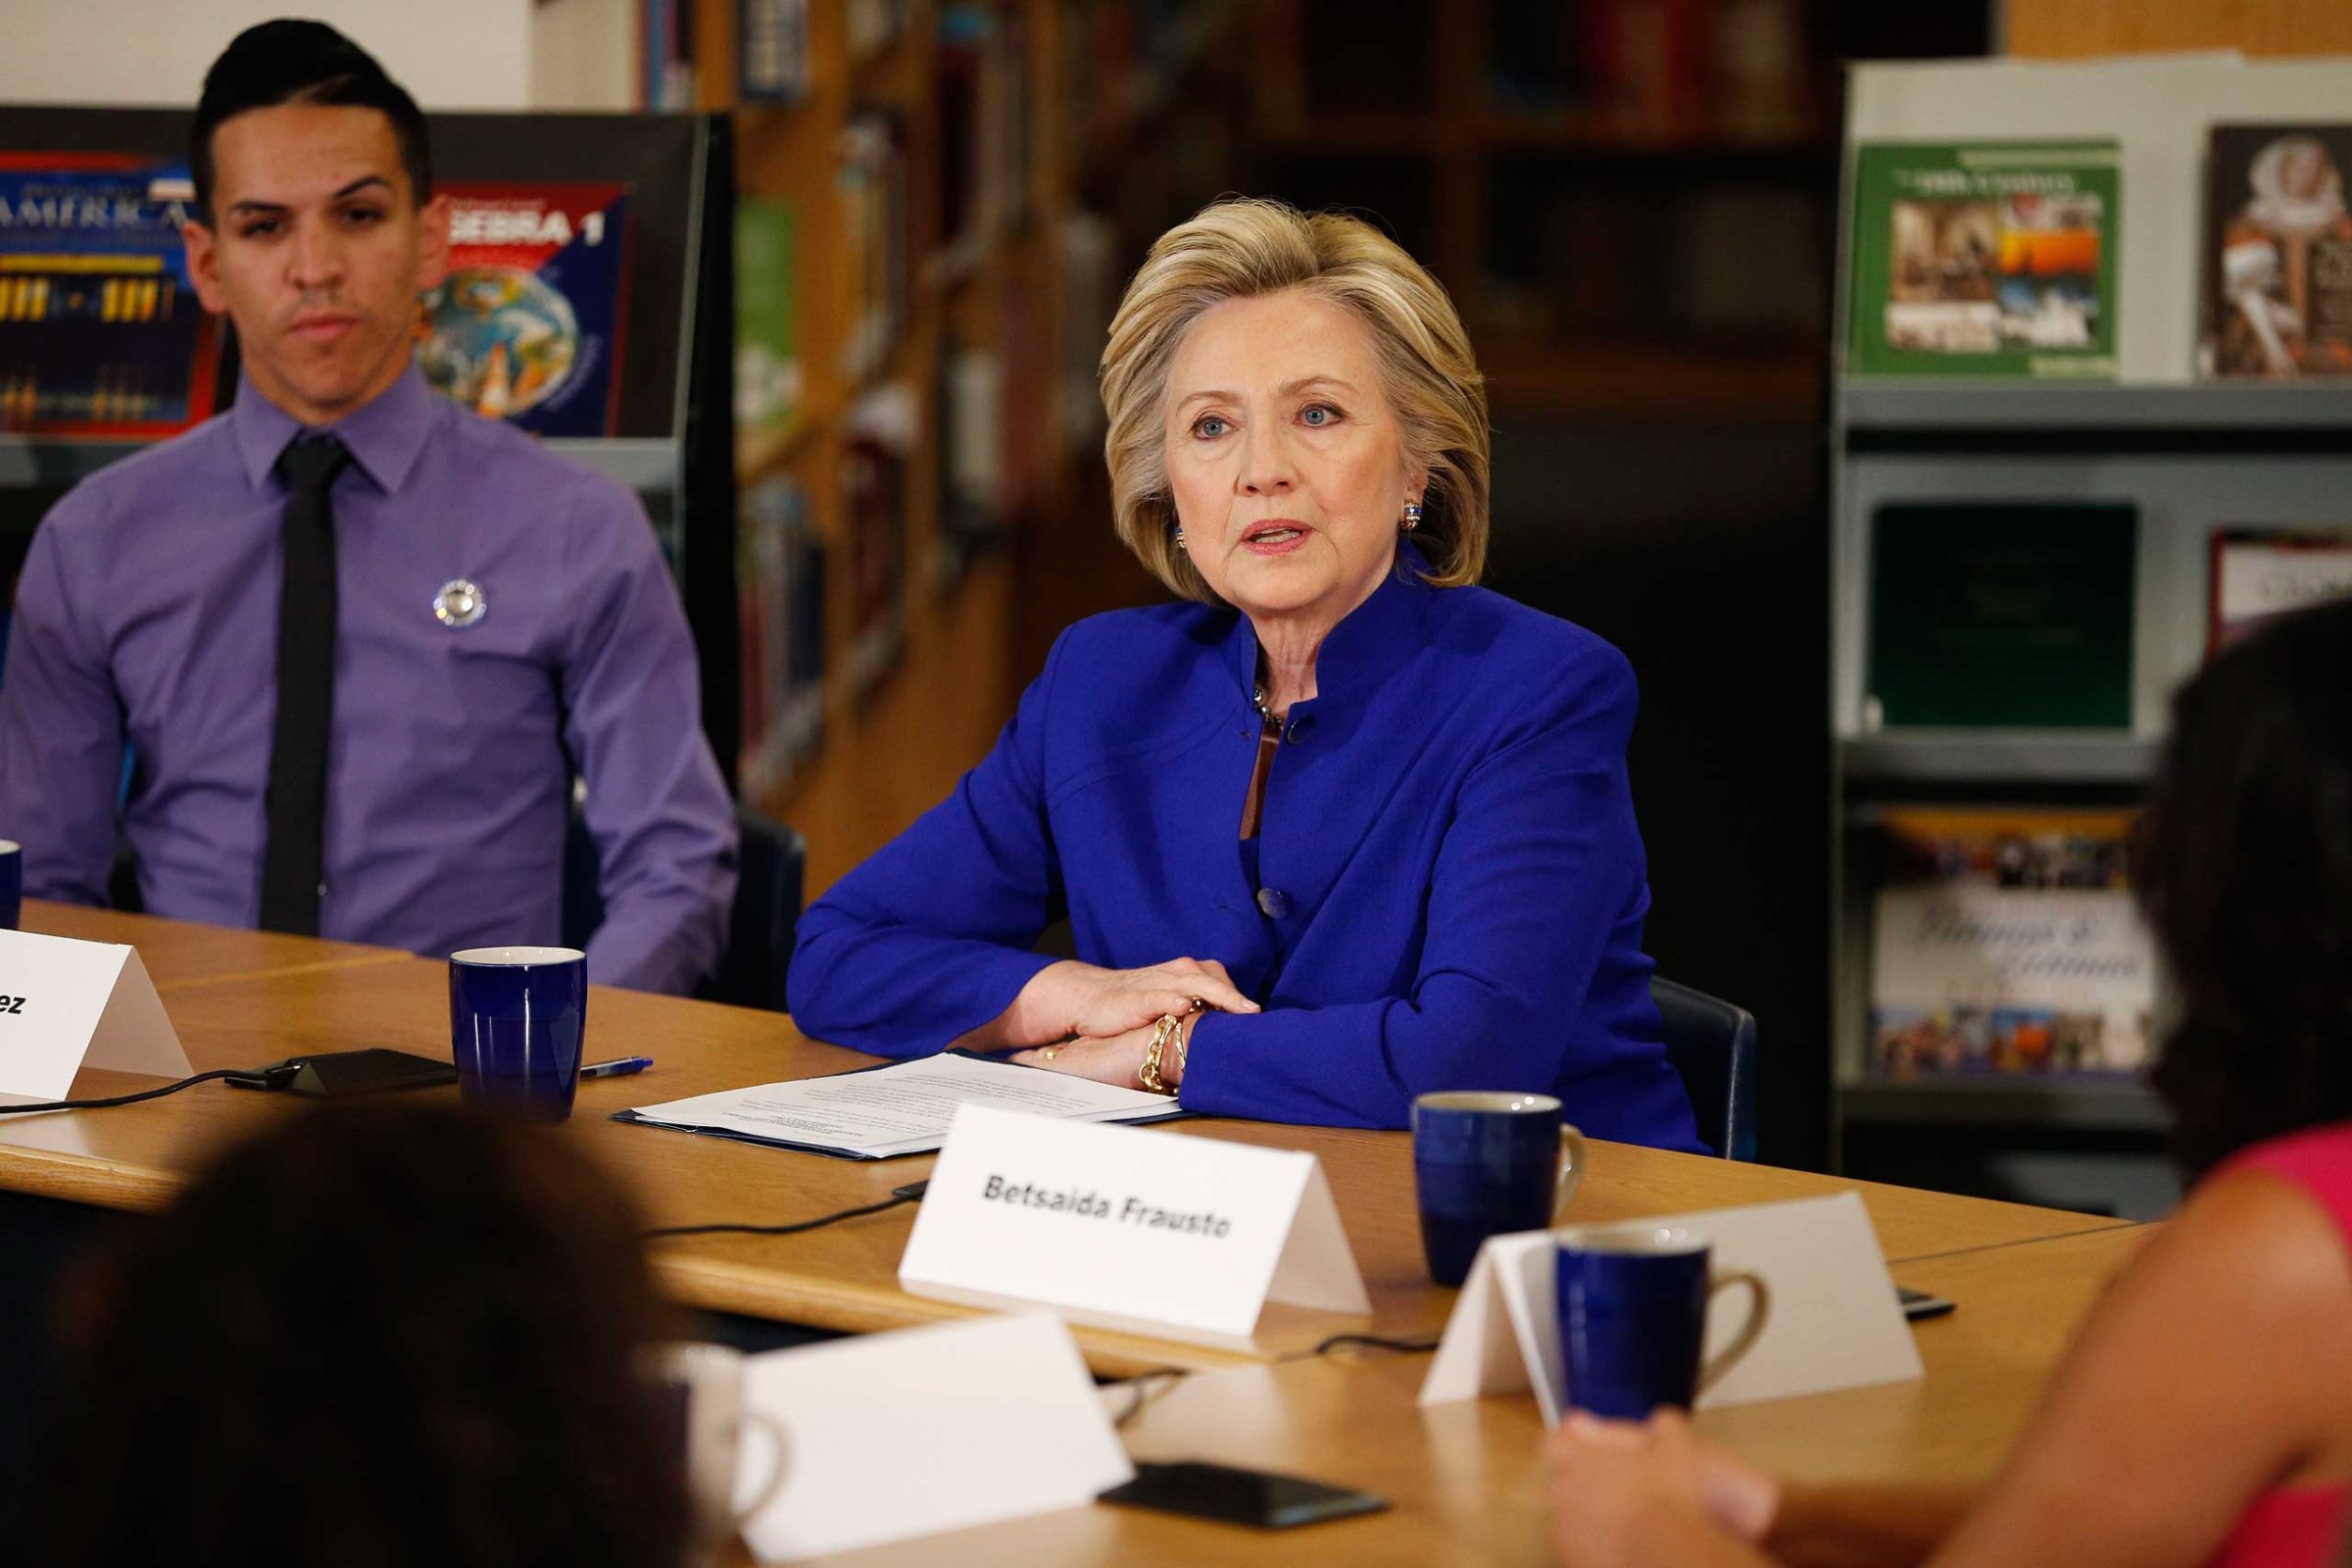 Hillary Rodham Clinton speaks with a group at an event at Rancho High School in Las Vegas on May 5, 2015.